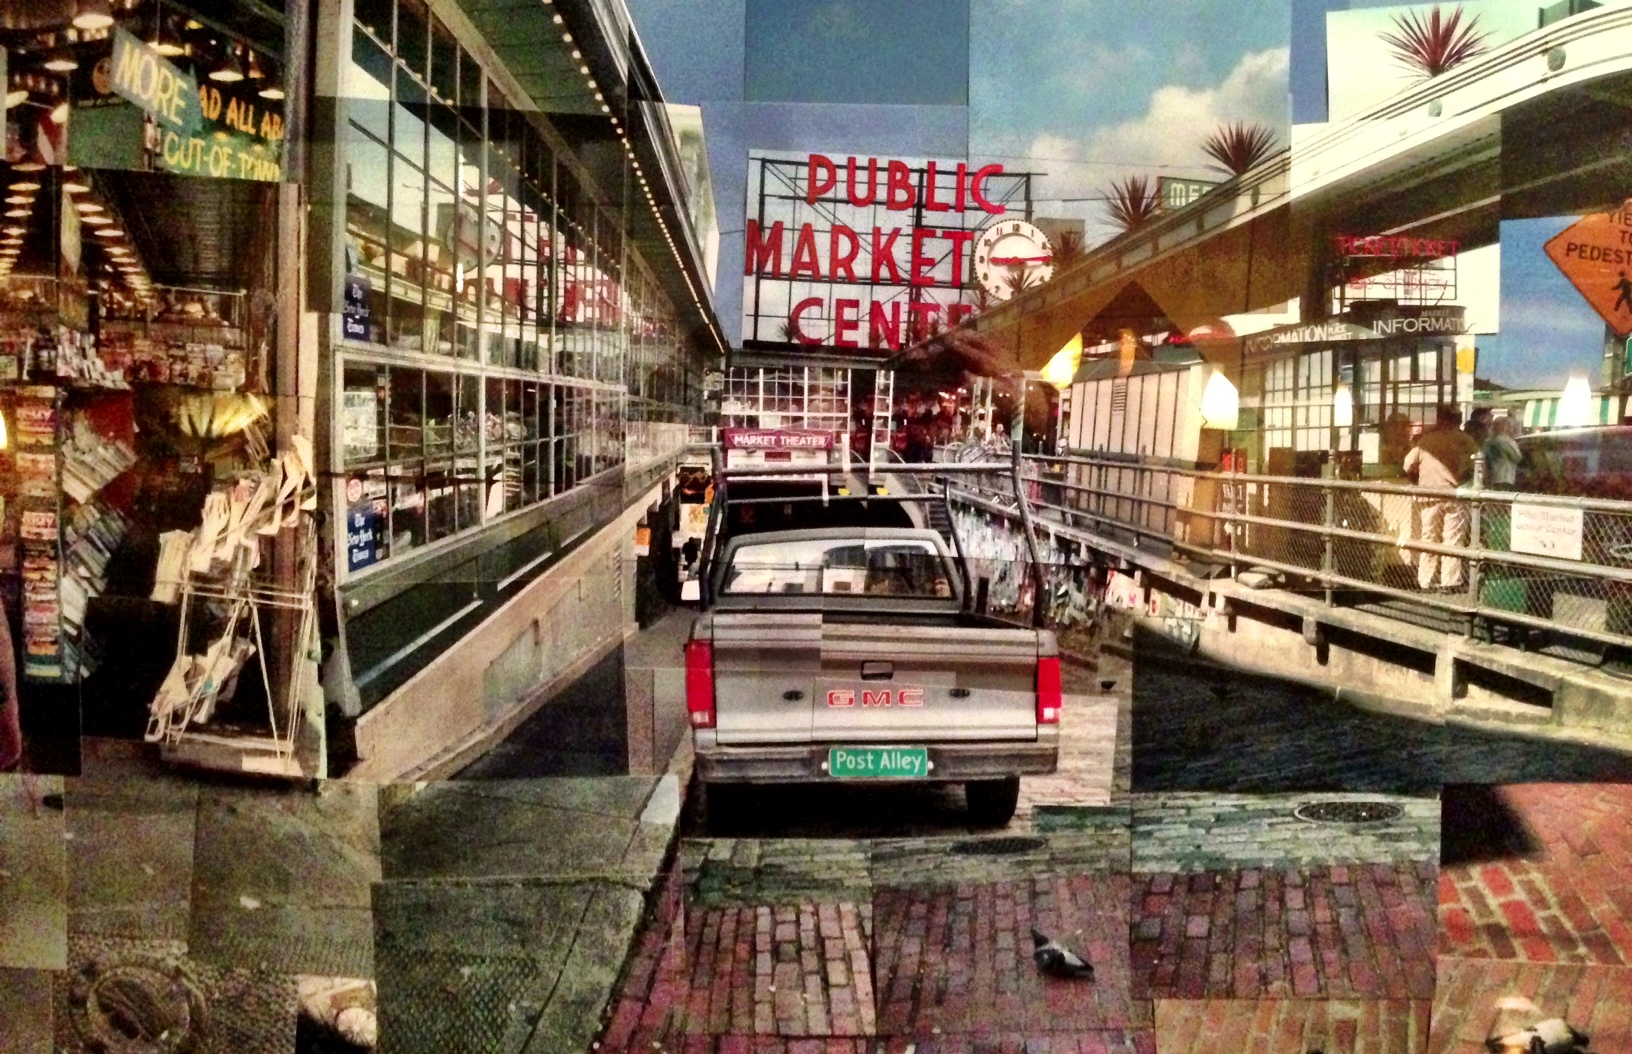 Detail of our 2nd floor bar landing "photo-art", shot by our friend John at the entrance to the market!